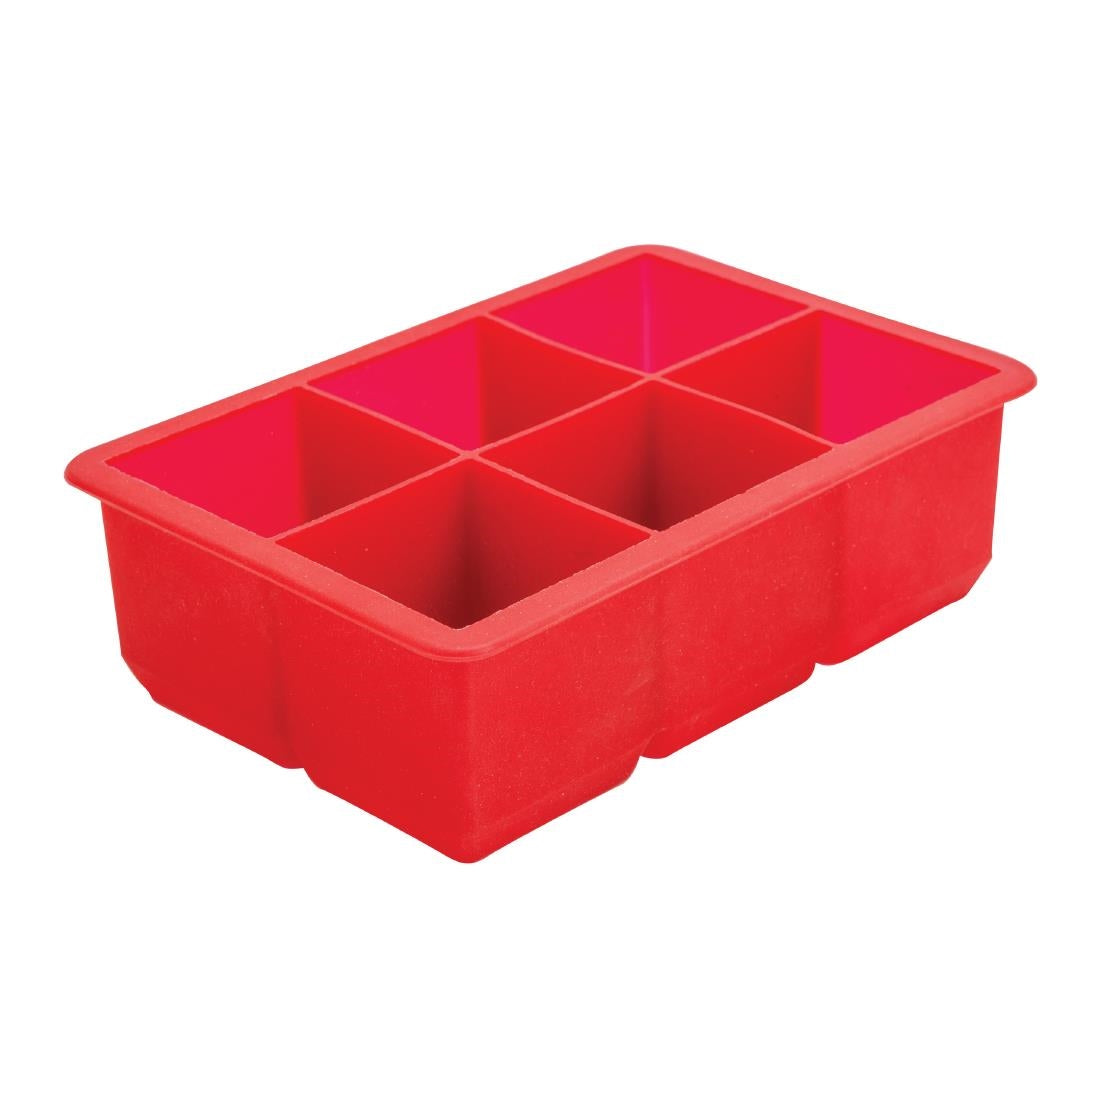 CZ403 Beaumont Six Cavity Silicone Ice Cube Mould Red JD Catering Equipment Solutions Ltd